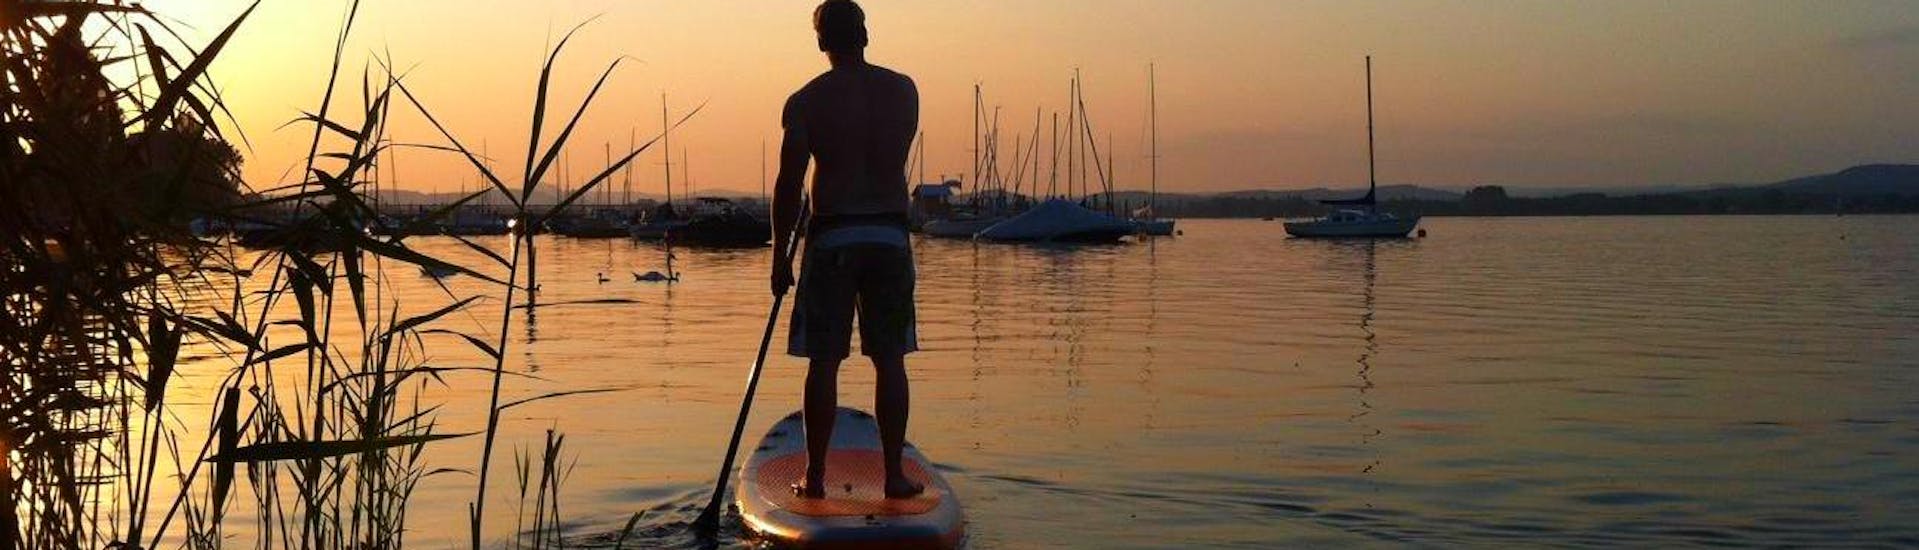 stand-up-paddling-lake-constance-mb-events-hero